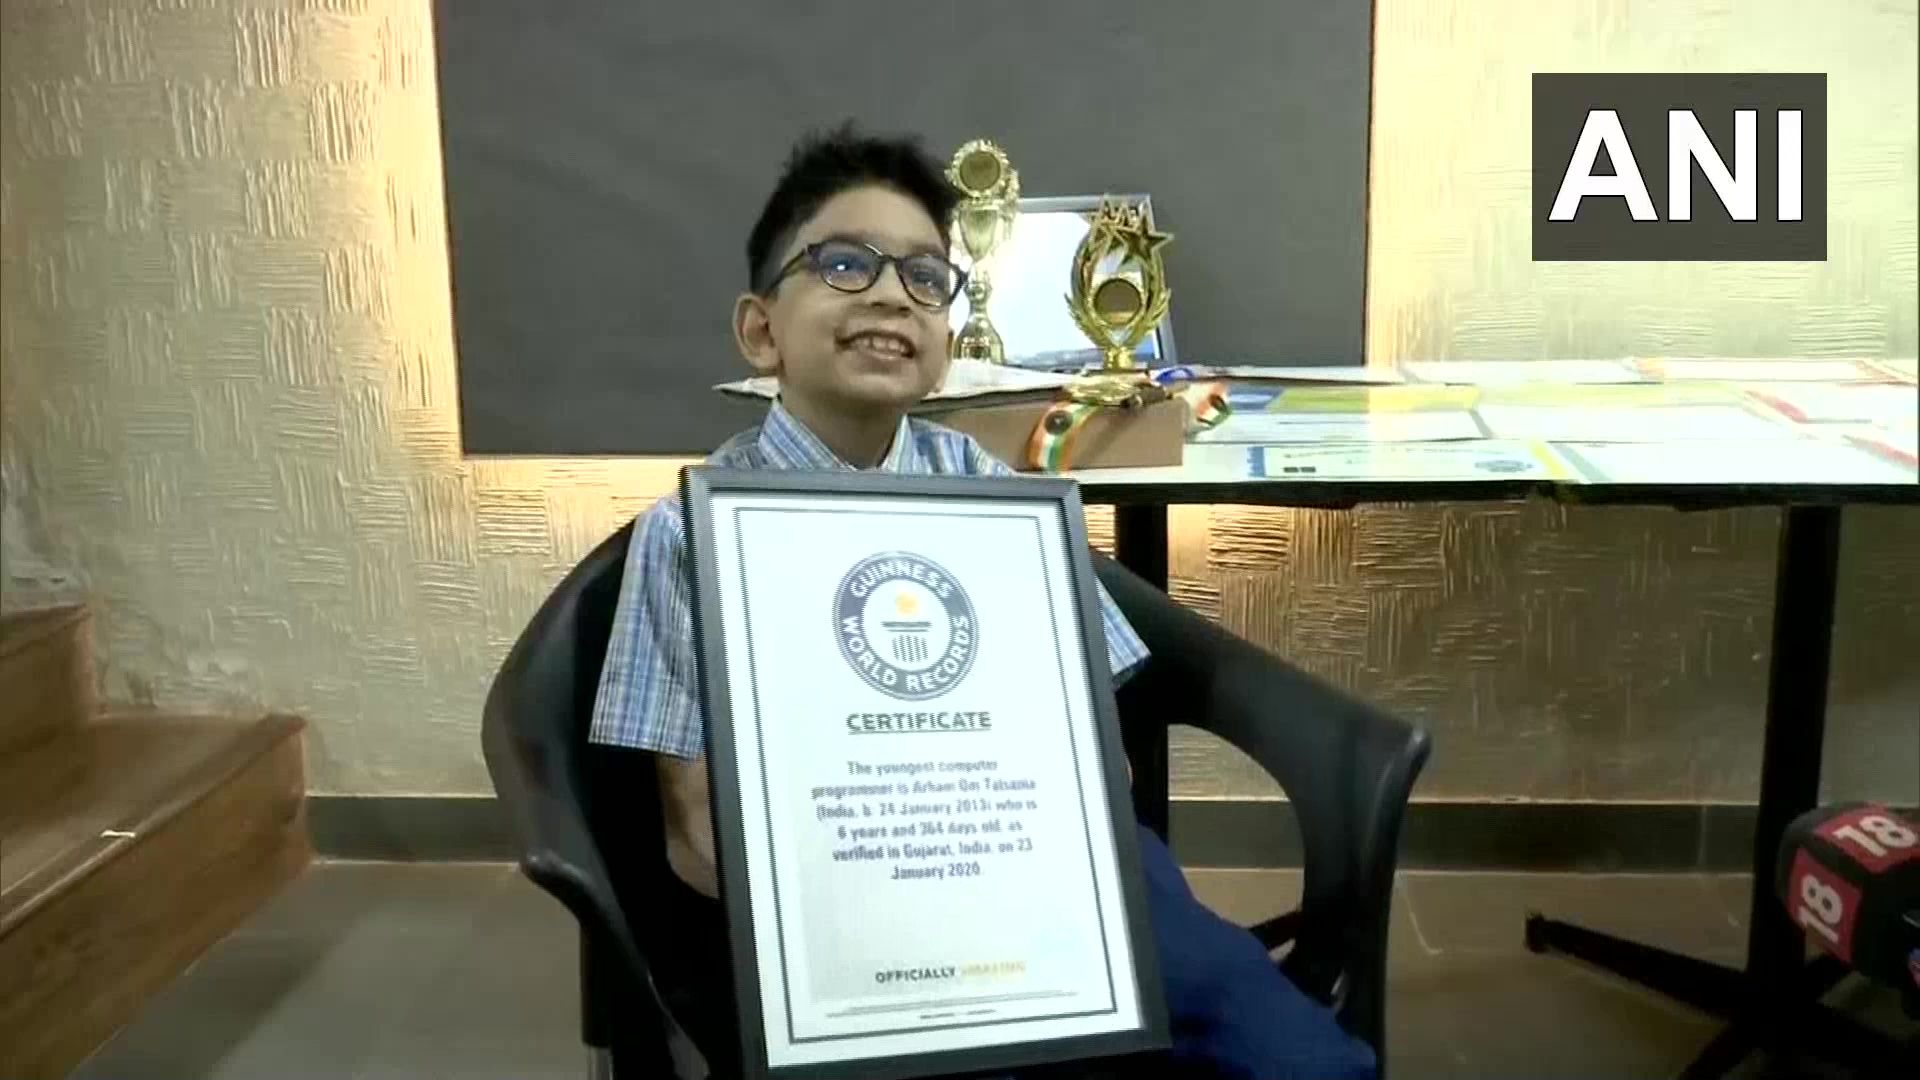 Six-year-old sets world record as youngest computer programmer